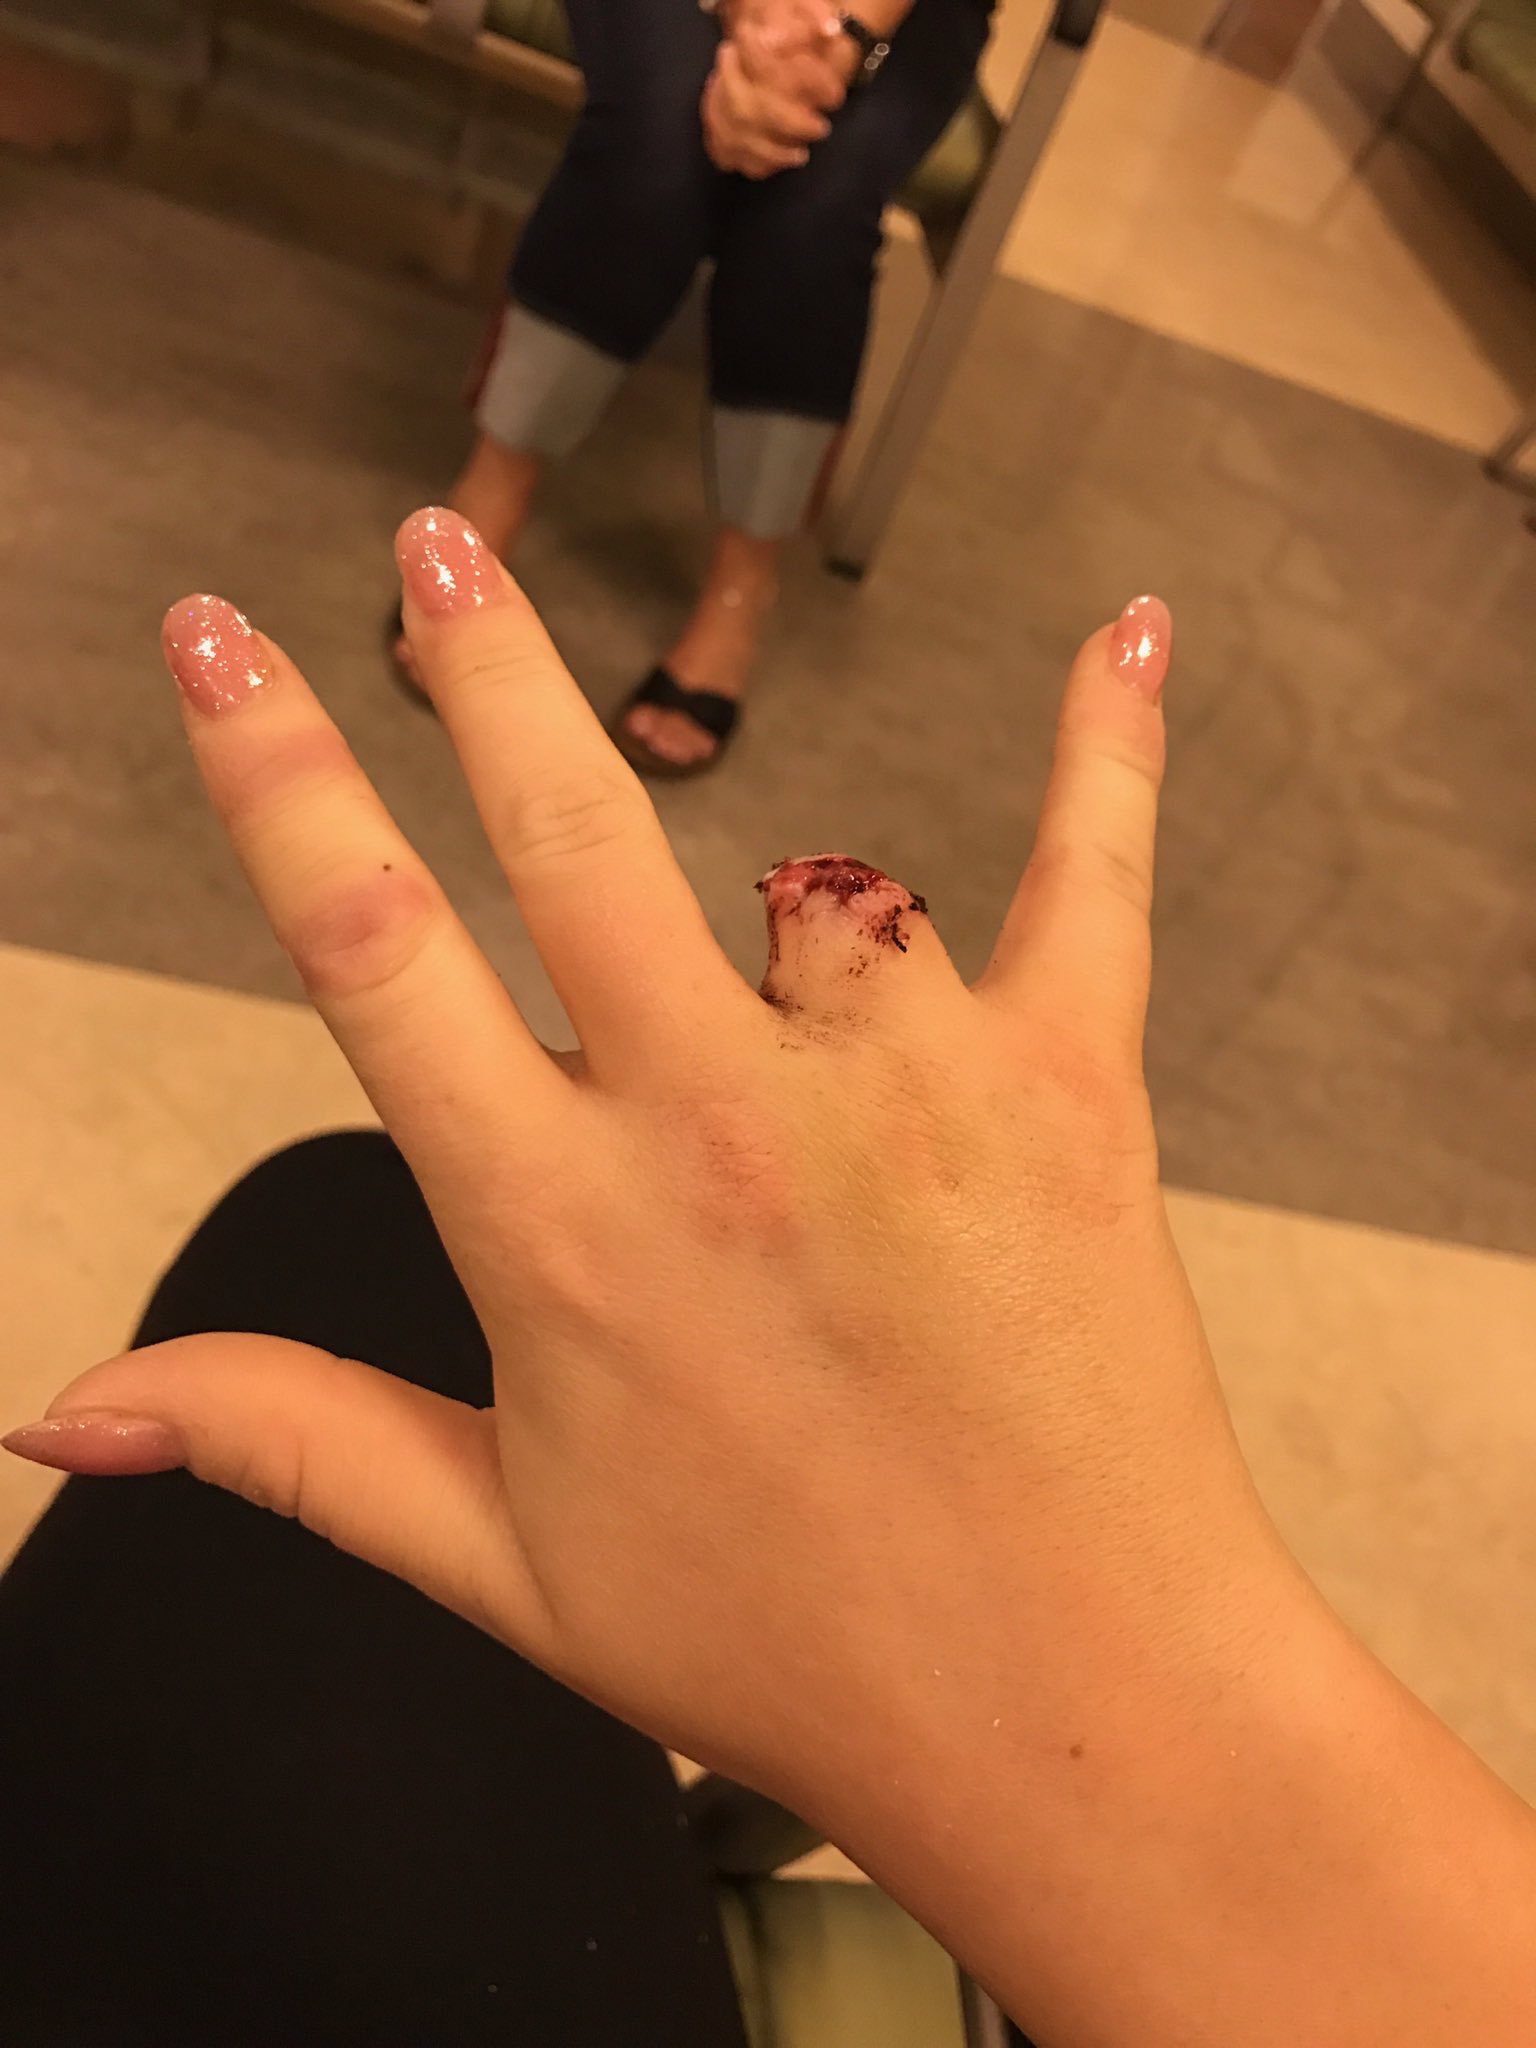 PSA: Don't jump a fence with a ring on.